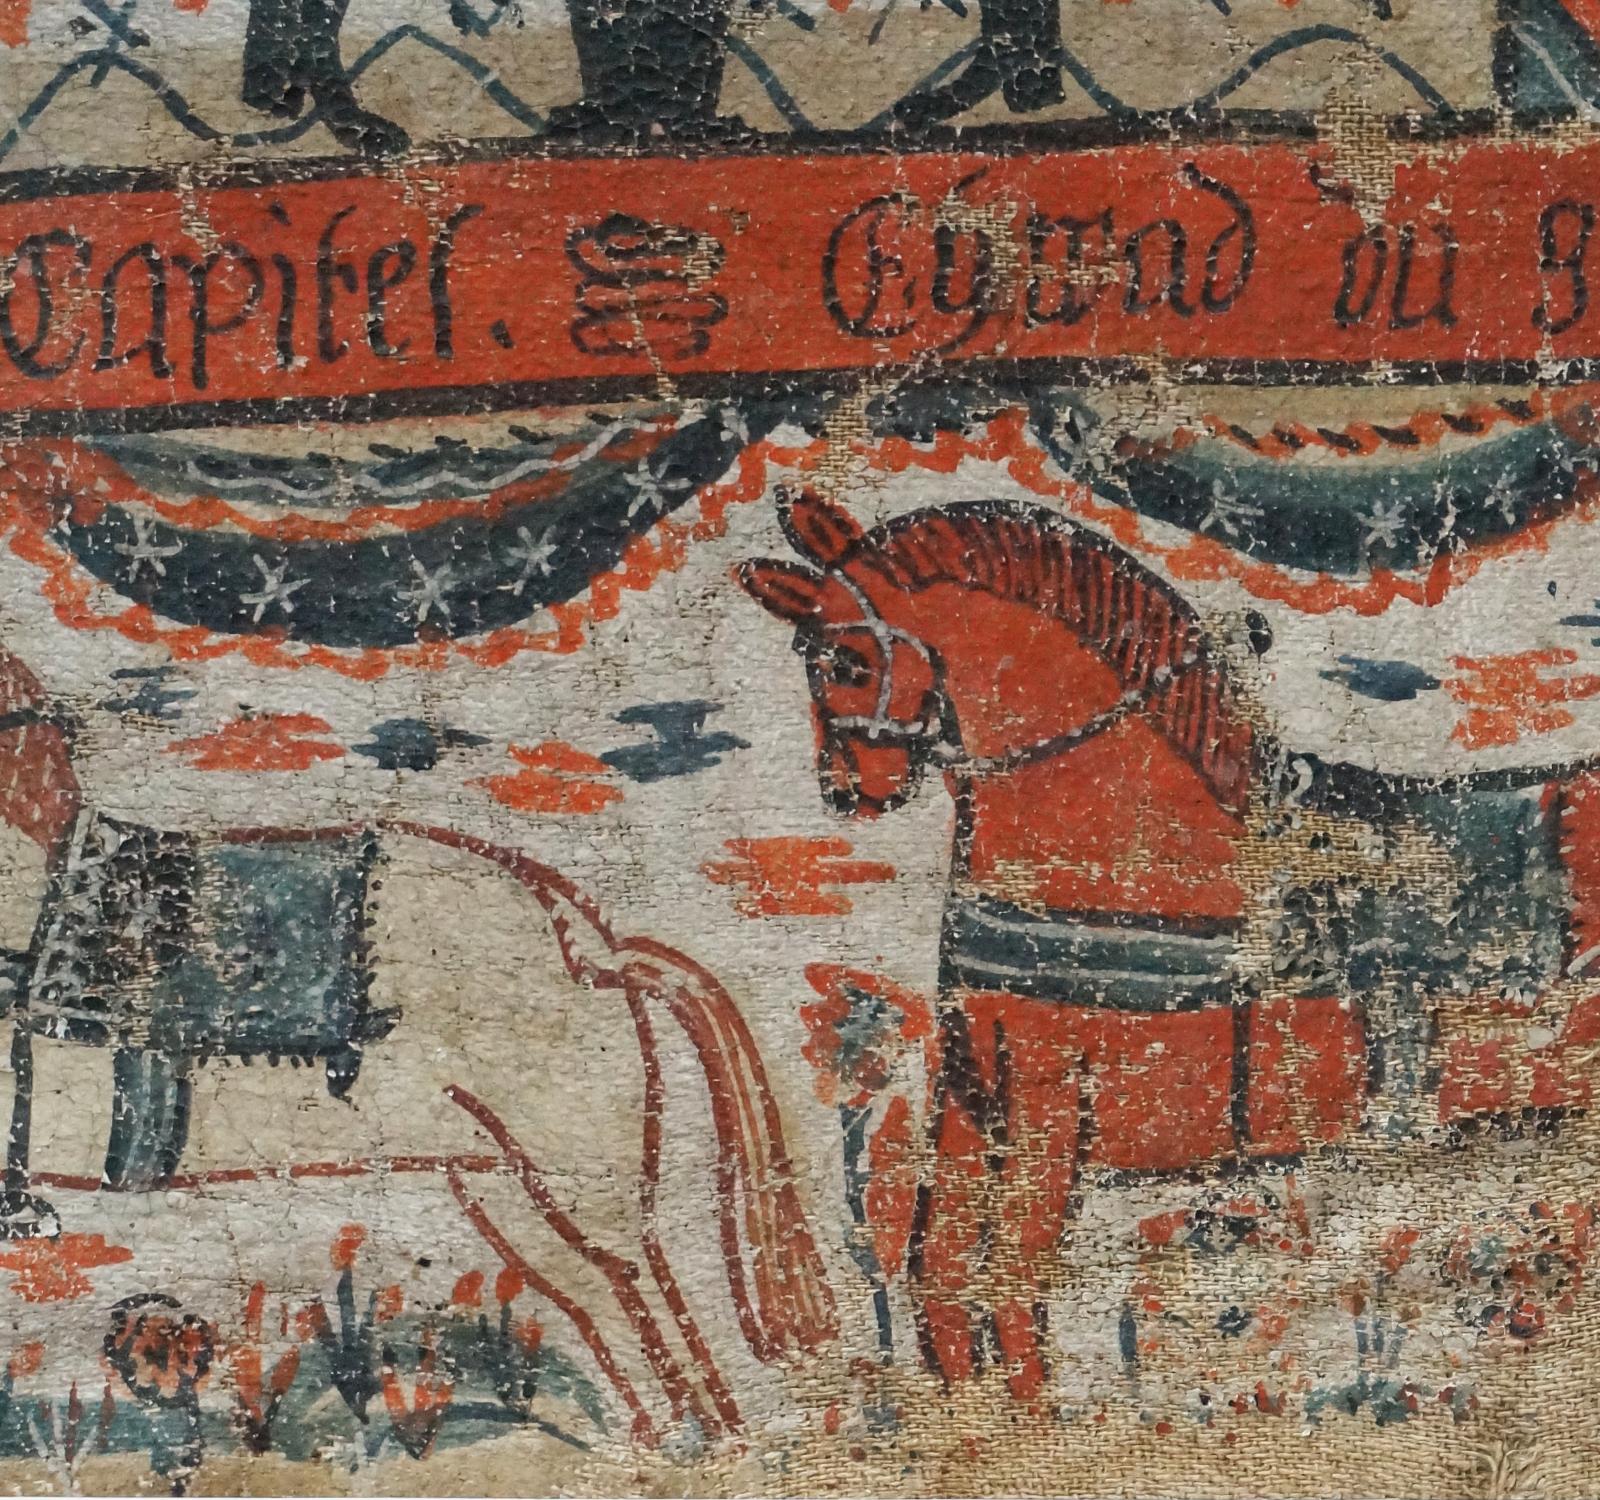 Hand-Painted Fragment of Swedish Bonad with Two Figures